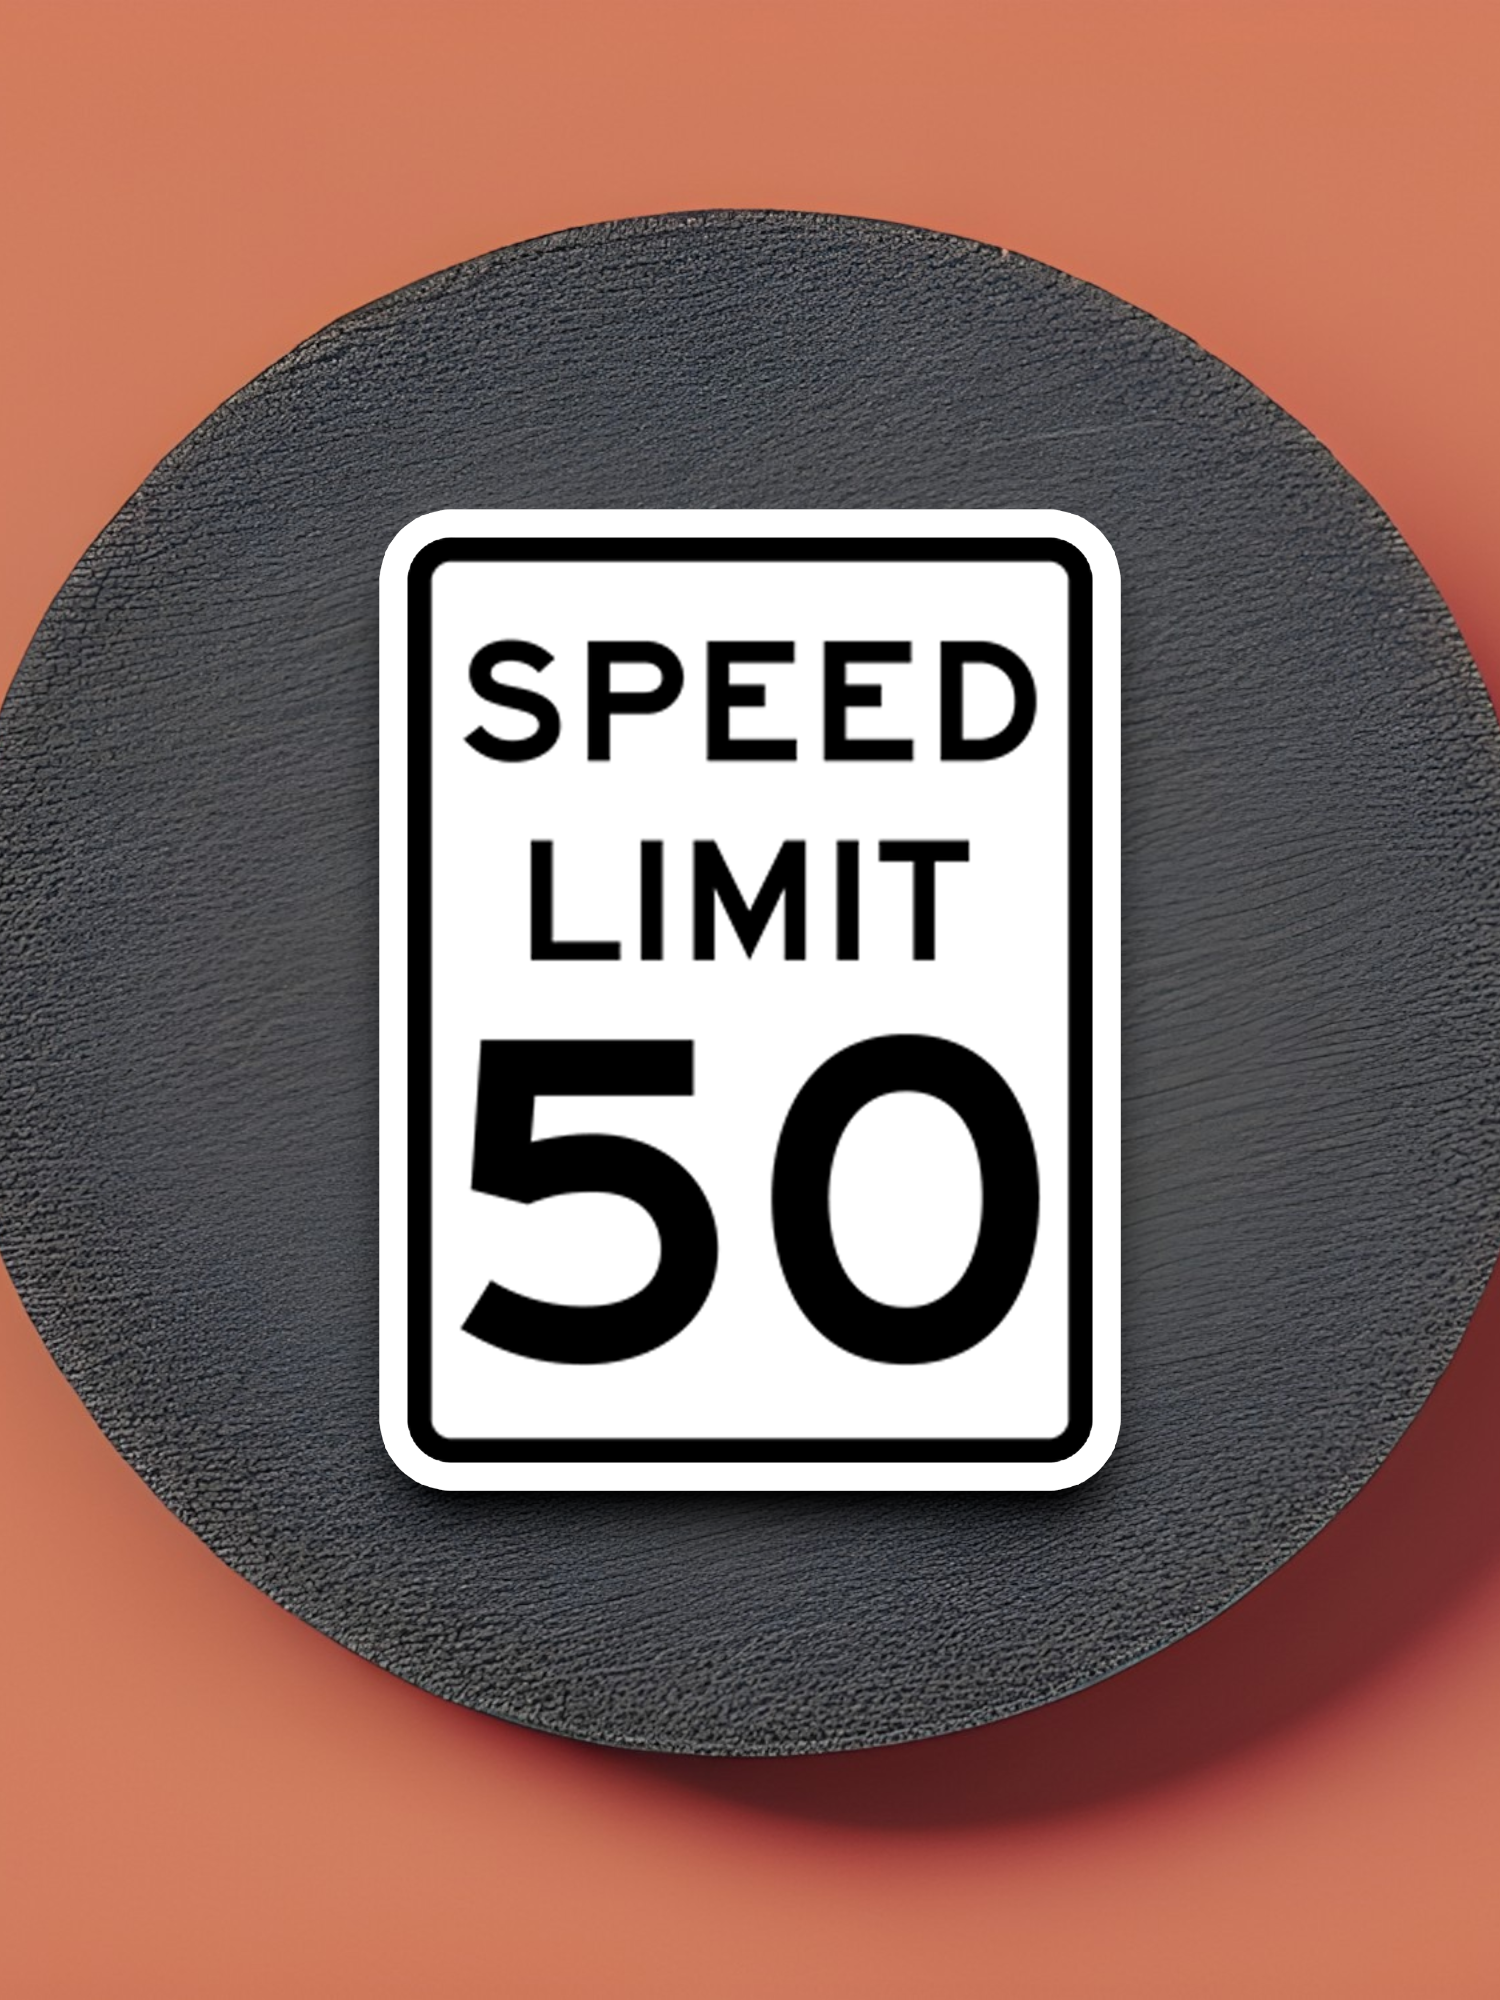 50 Miles Per Hour Speed Limit Road Sign Sticker